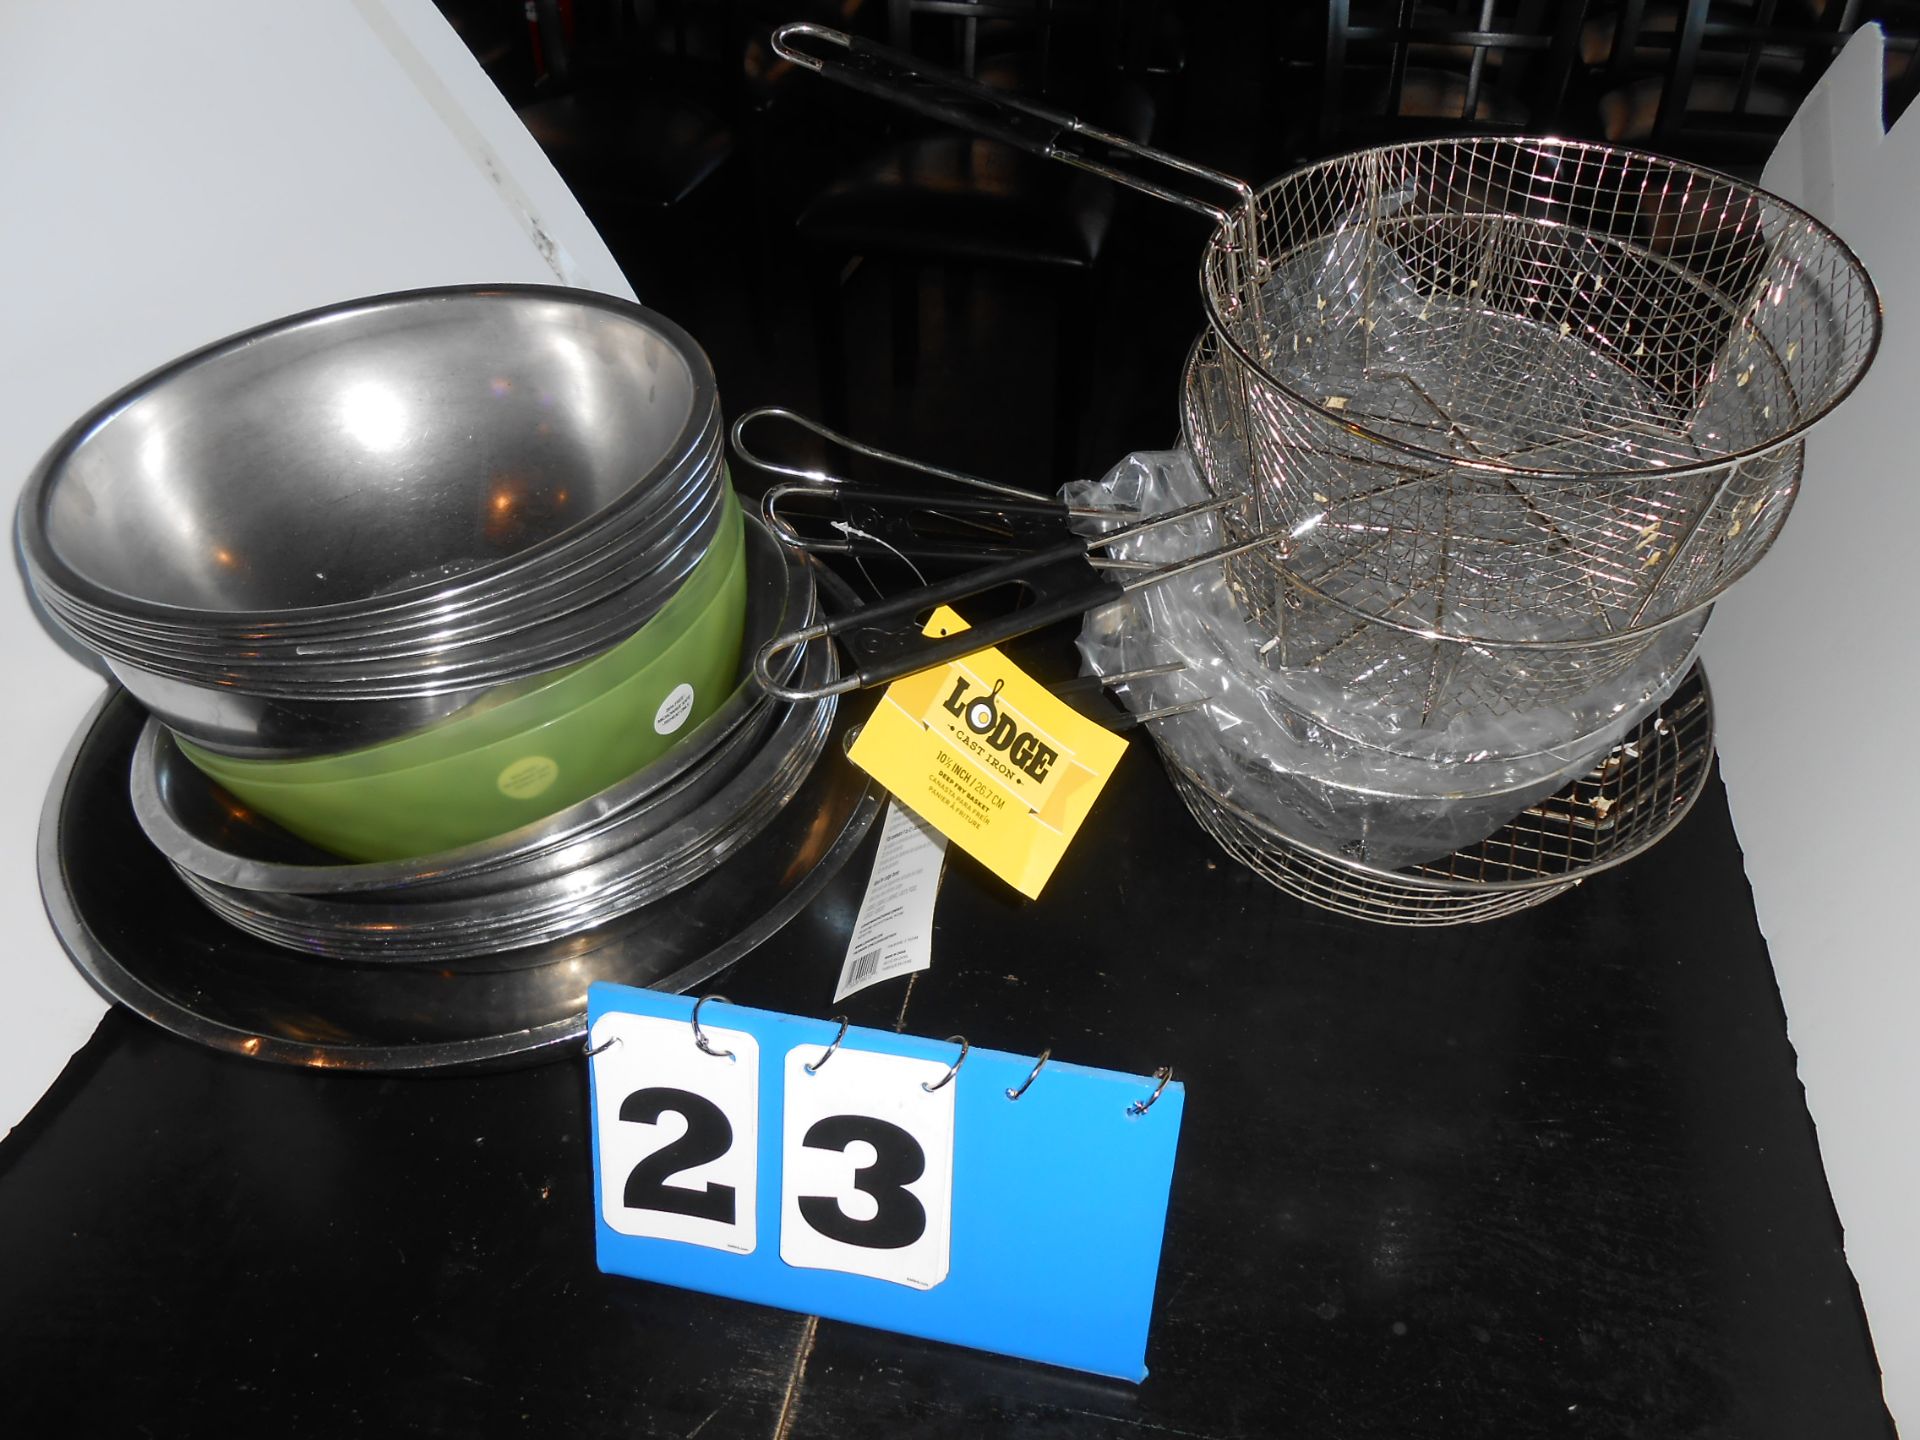 Lot: Stainless Steel Mixing Bowls and Round Fryer Baskets